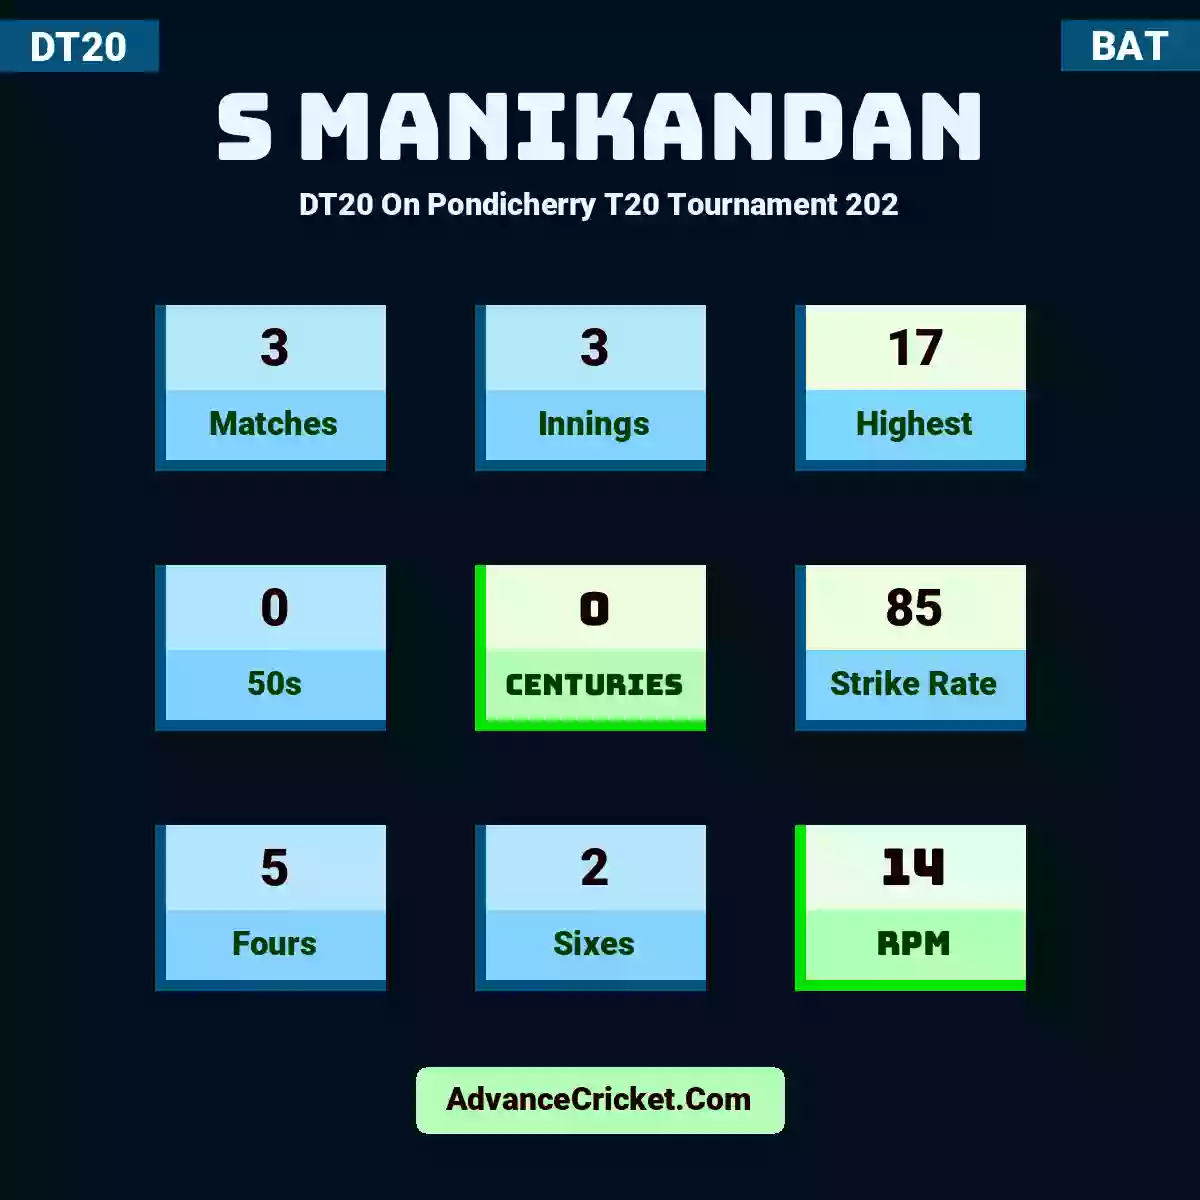 S Manikandan DT20  On Pondicherry T20 Tournament 202, S Manikandan played 3 matches, scored 17 runs as highest, 0 half-centuries, and 0 centuries, with a strike rate of 85. S.Manikandan hit 5 fours and 2 sixes, with an RPM of 14.